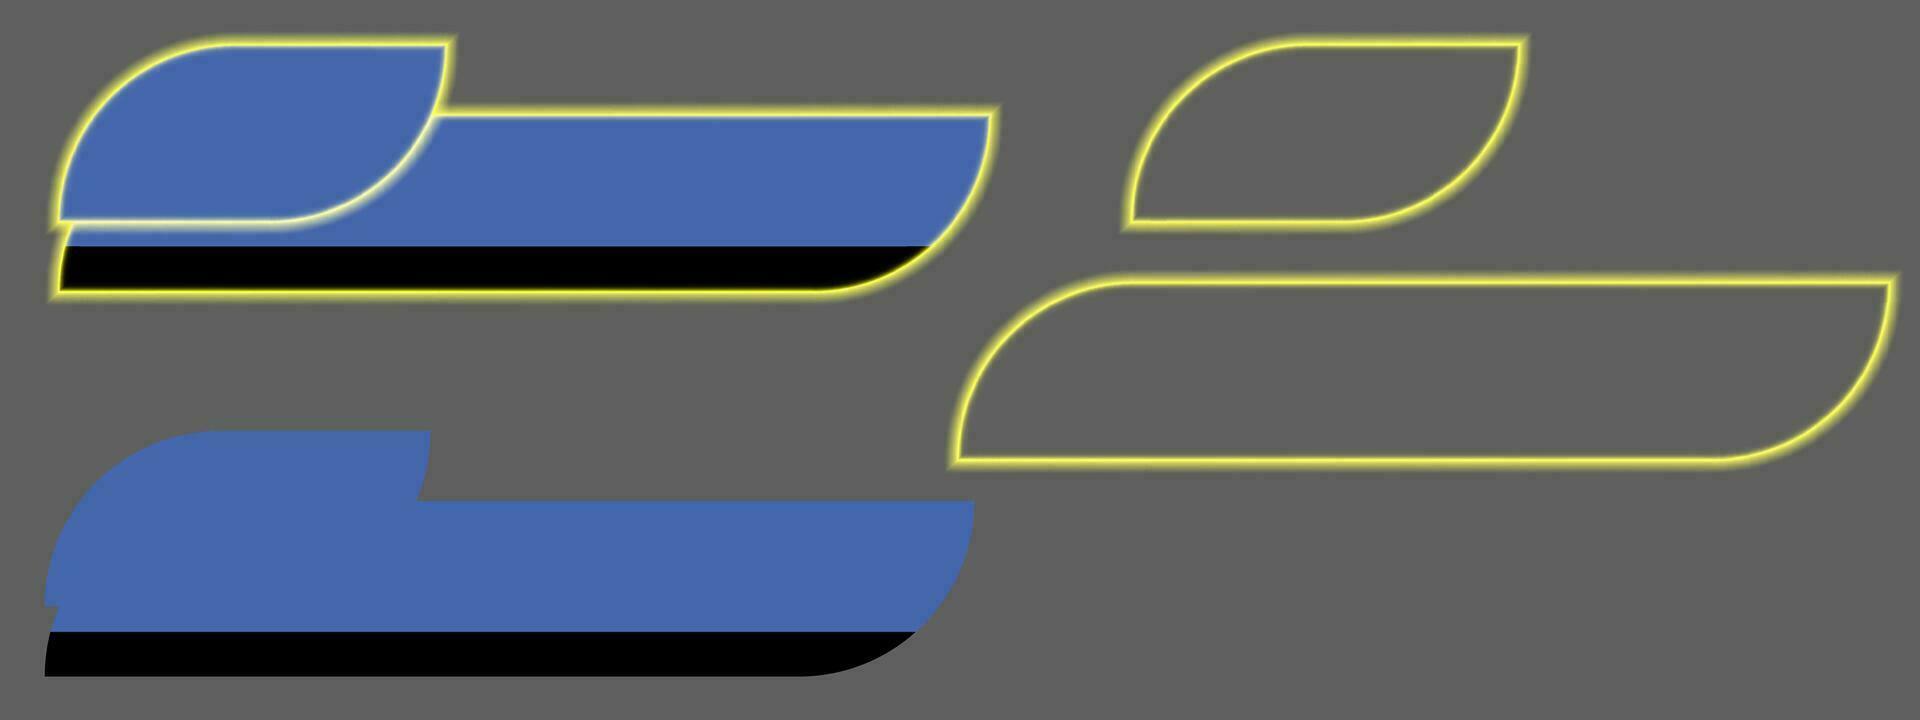 Simple Modern Lower Thirds In Blue With Neon Yellow Stripes For TV Shows, Streaming And Perfect For News vector